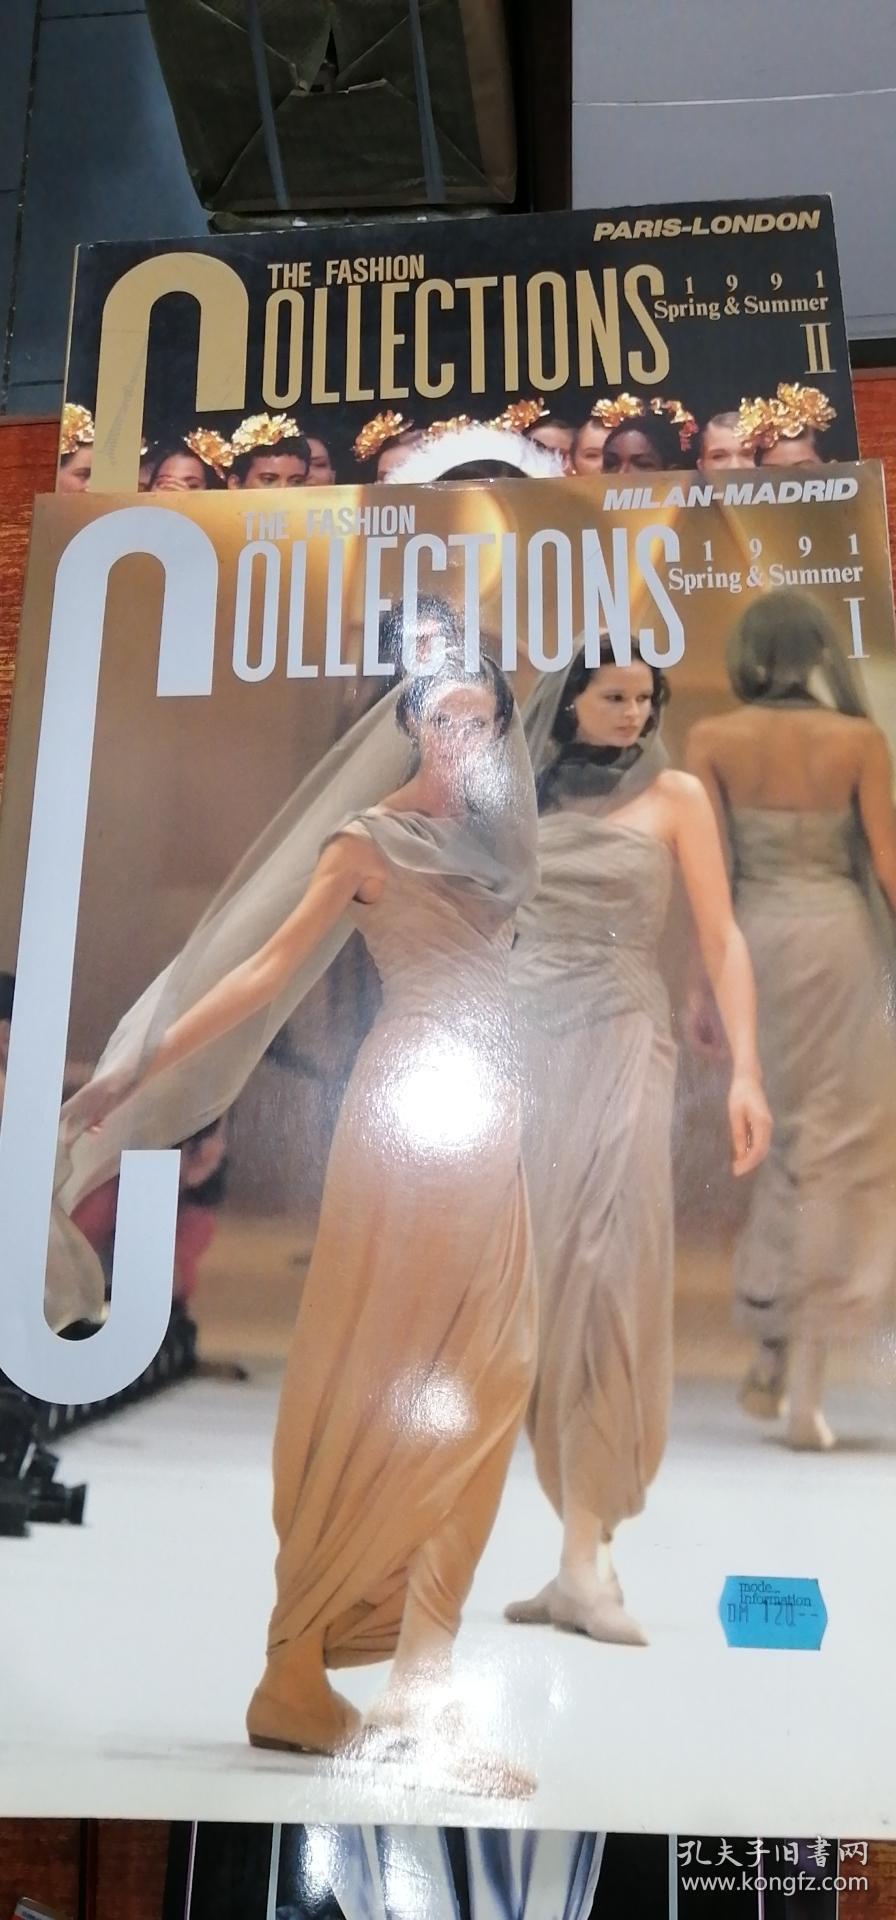 THE FASHION COLLECTIONS 1991SPRING&SUMMER MILAN-MADRID 1.2二册合售